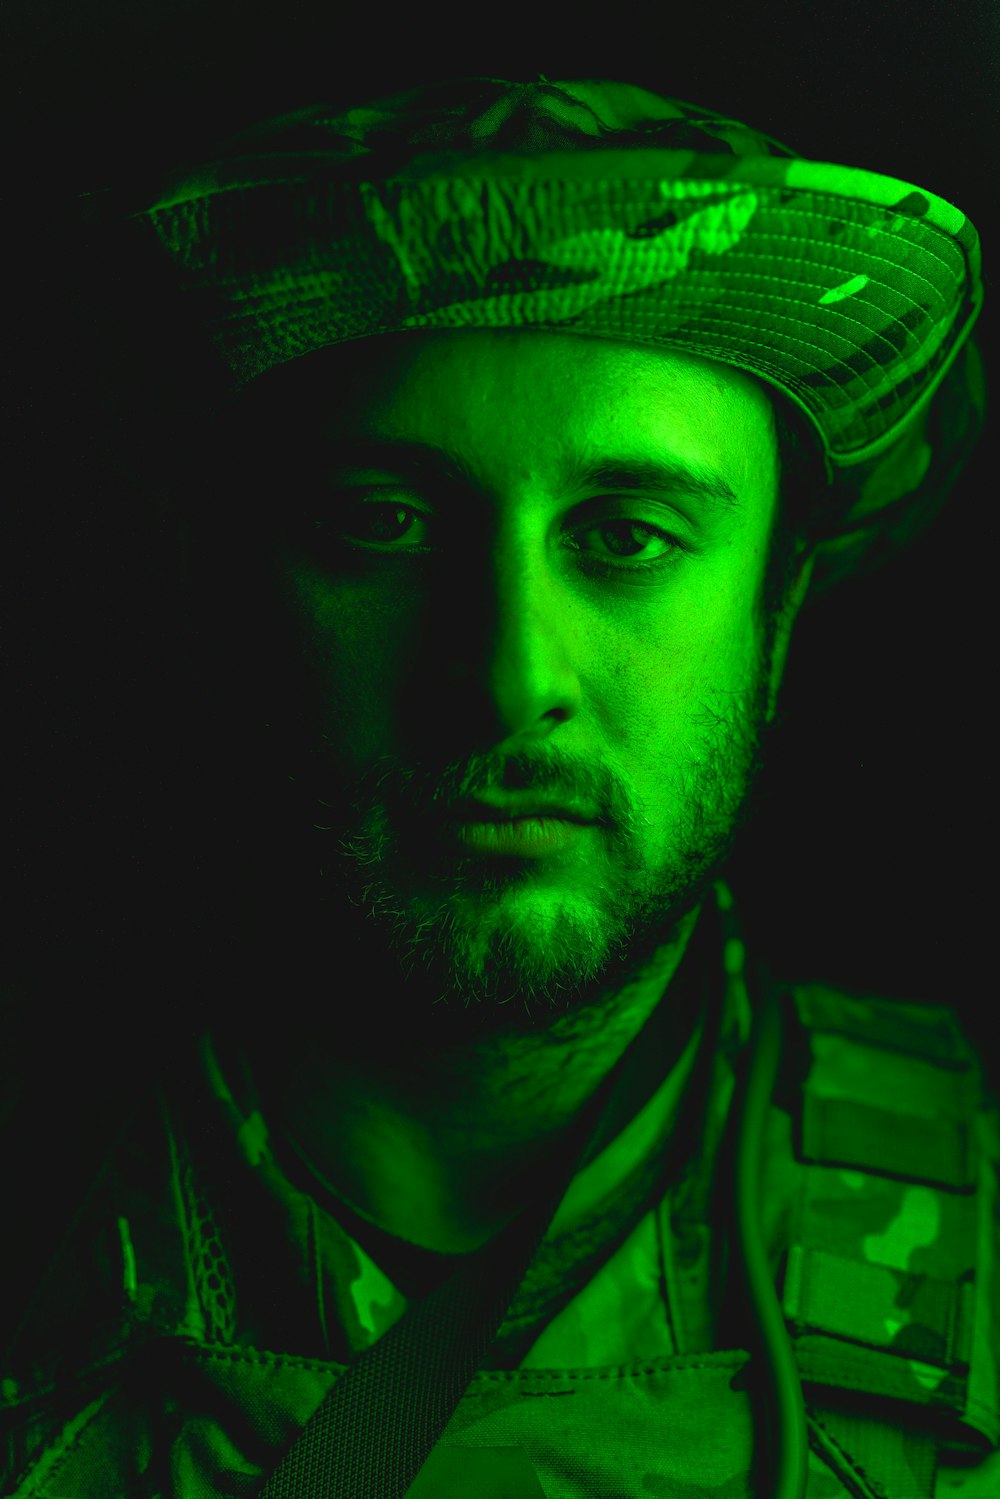 a man wearing a hat and a green light